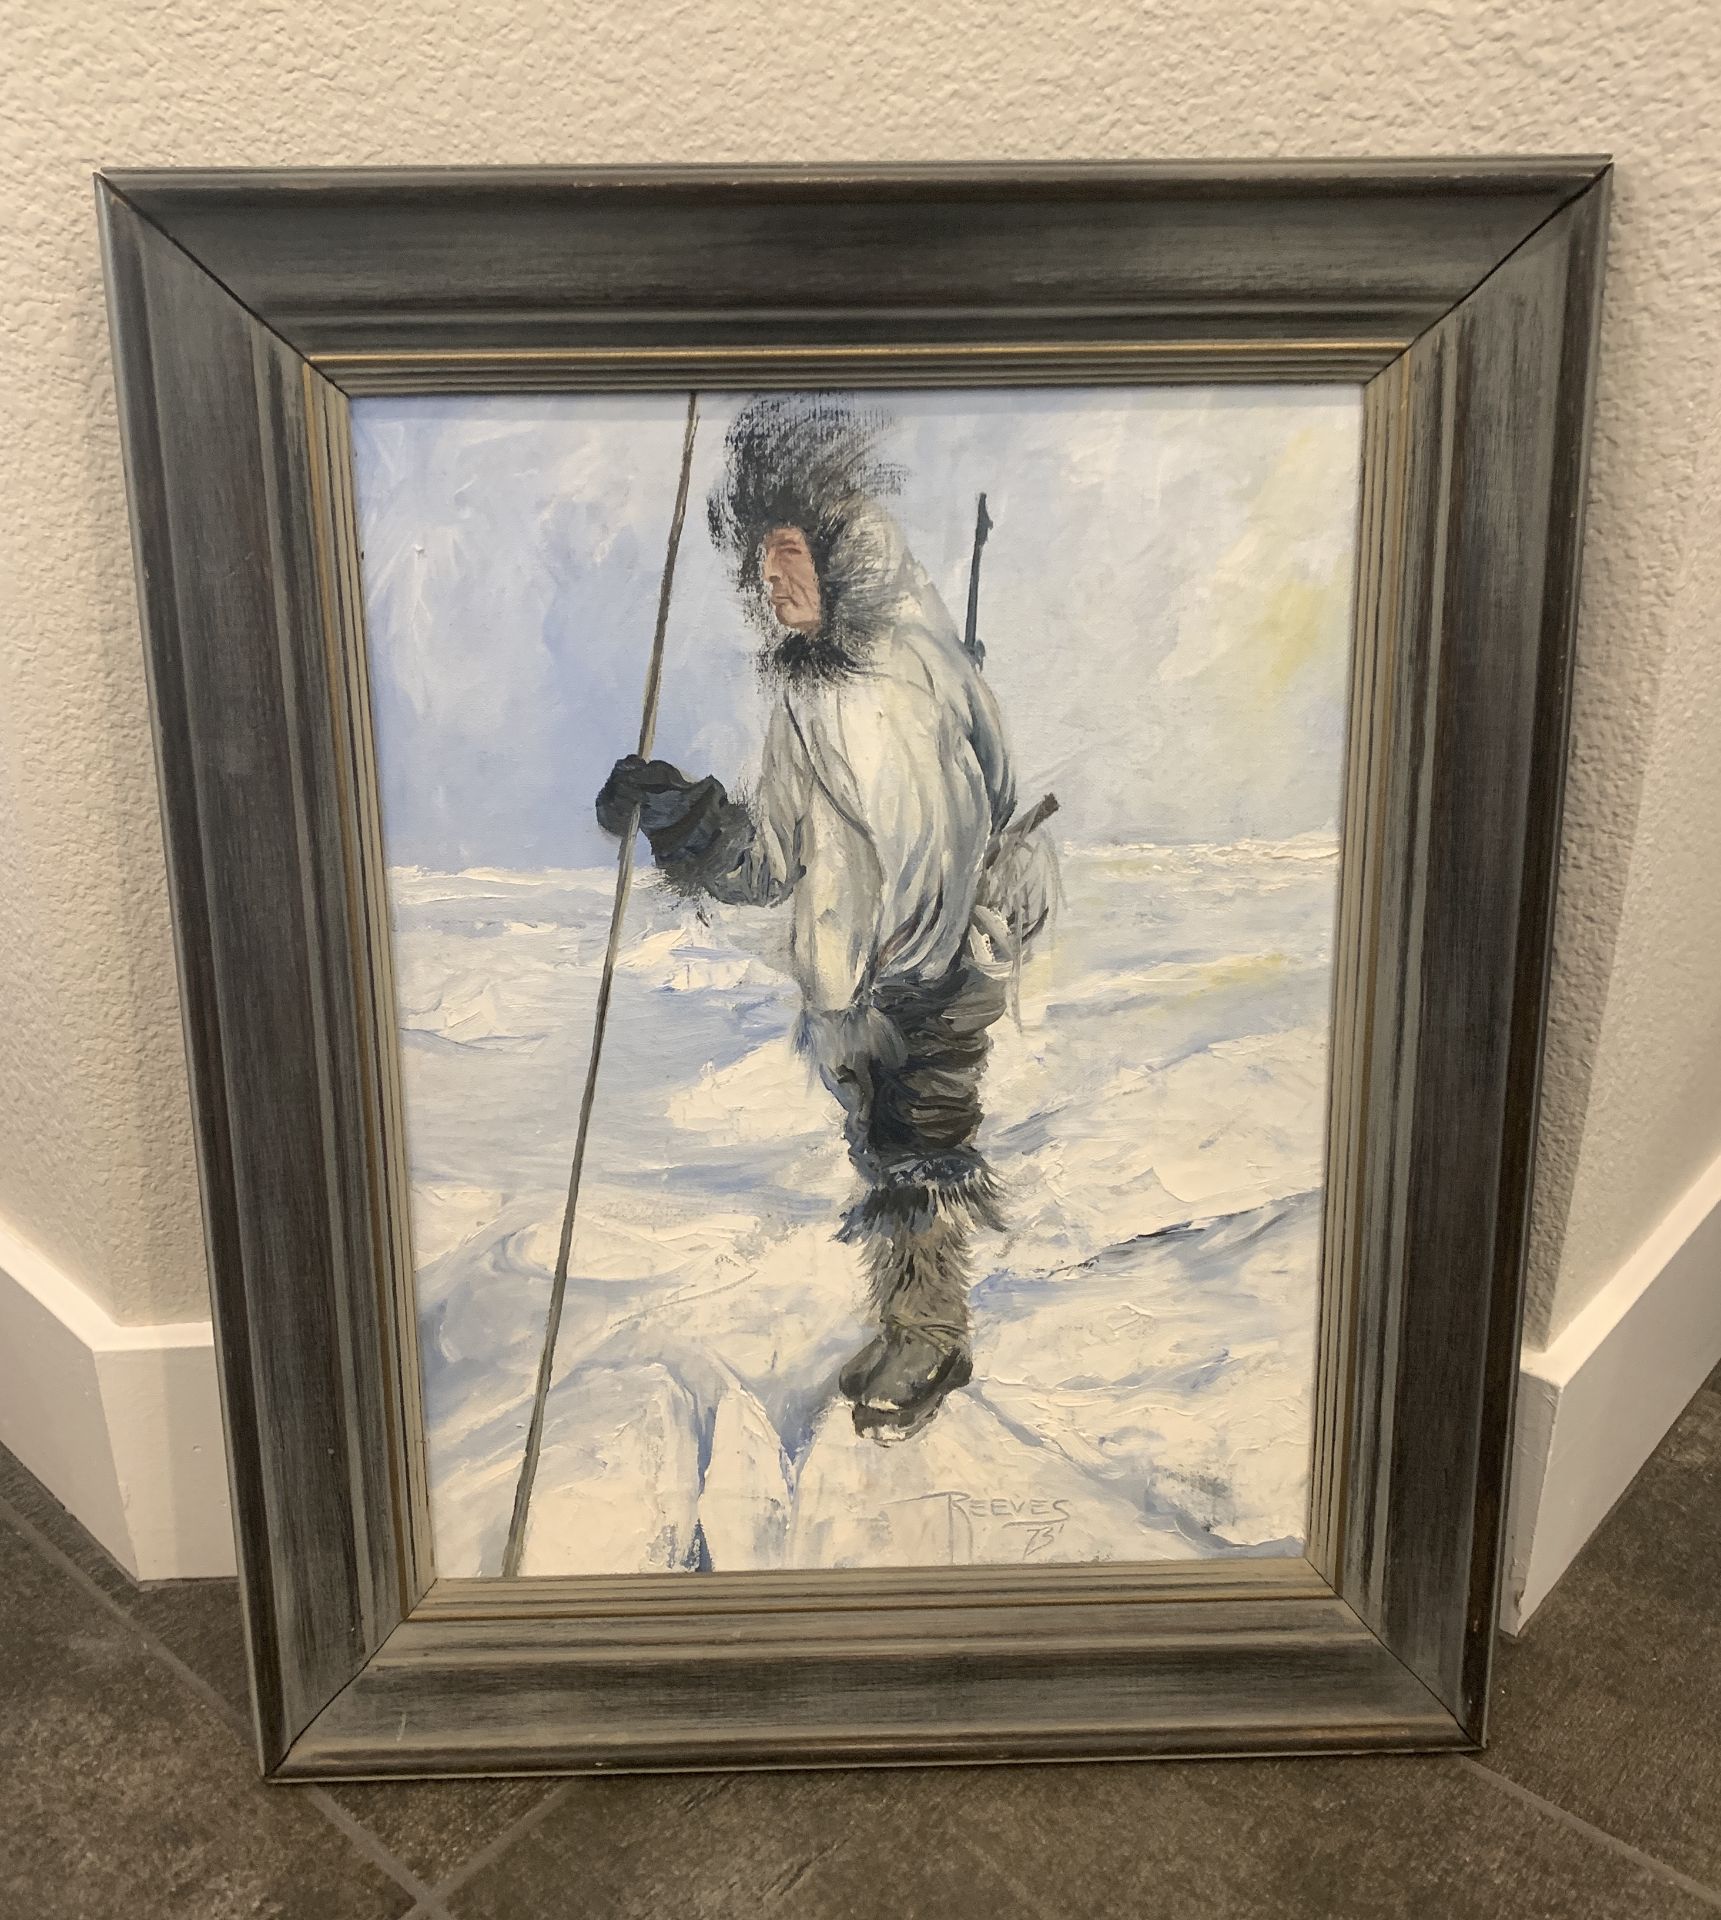 REEVES INUIT PAINTING FRAMED 1973 SIZE 19X23" OIL ON CANVAS